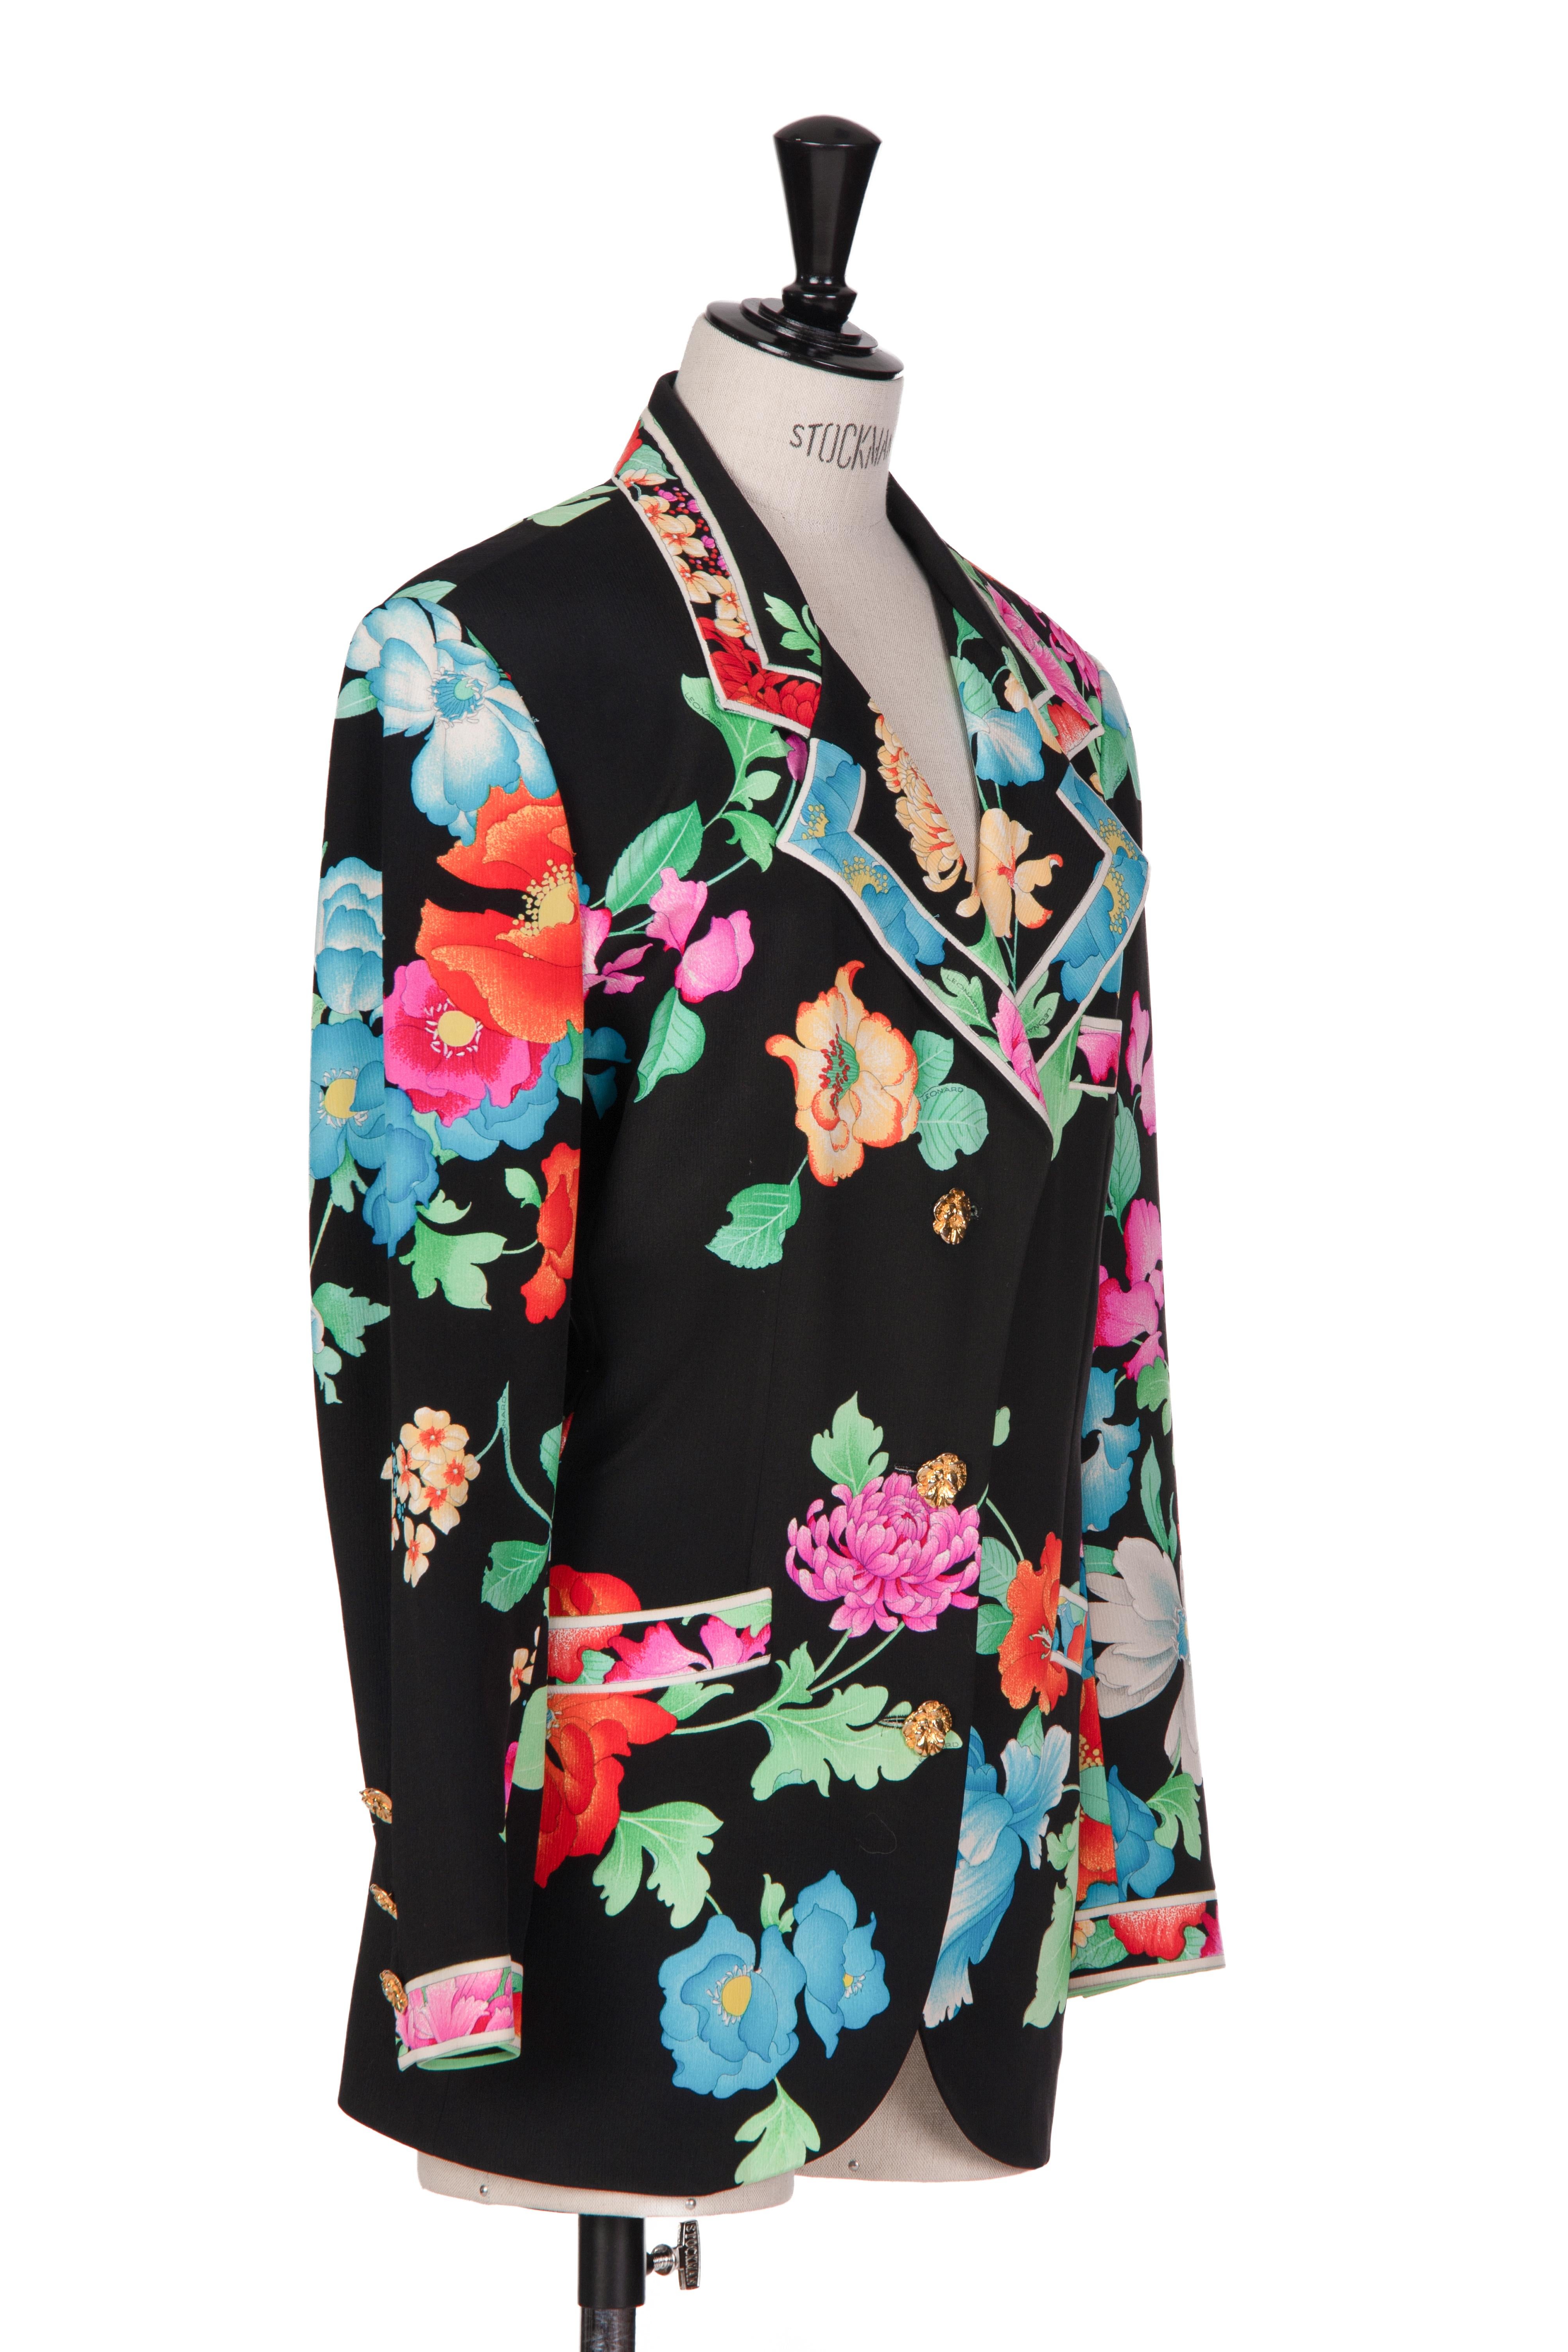 Here we have a wonderful 1980s Leonard Paris blazer with one of the fashion house's instantly recognizable signature floral prints.
 
The design is made from black pure silk and features a beautiful floral print of poppies, chrysanthemums,